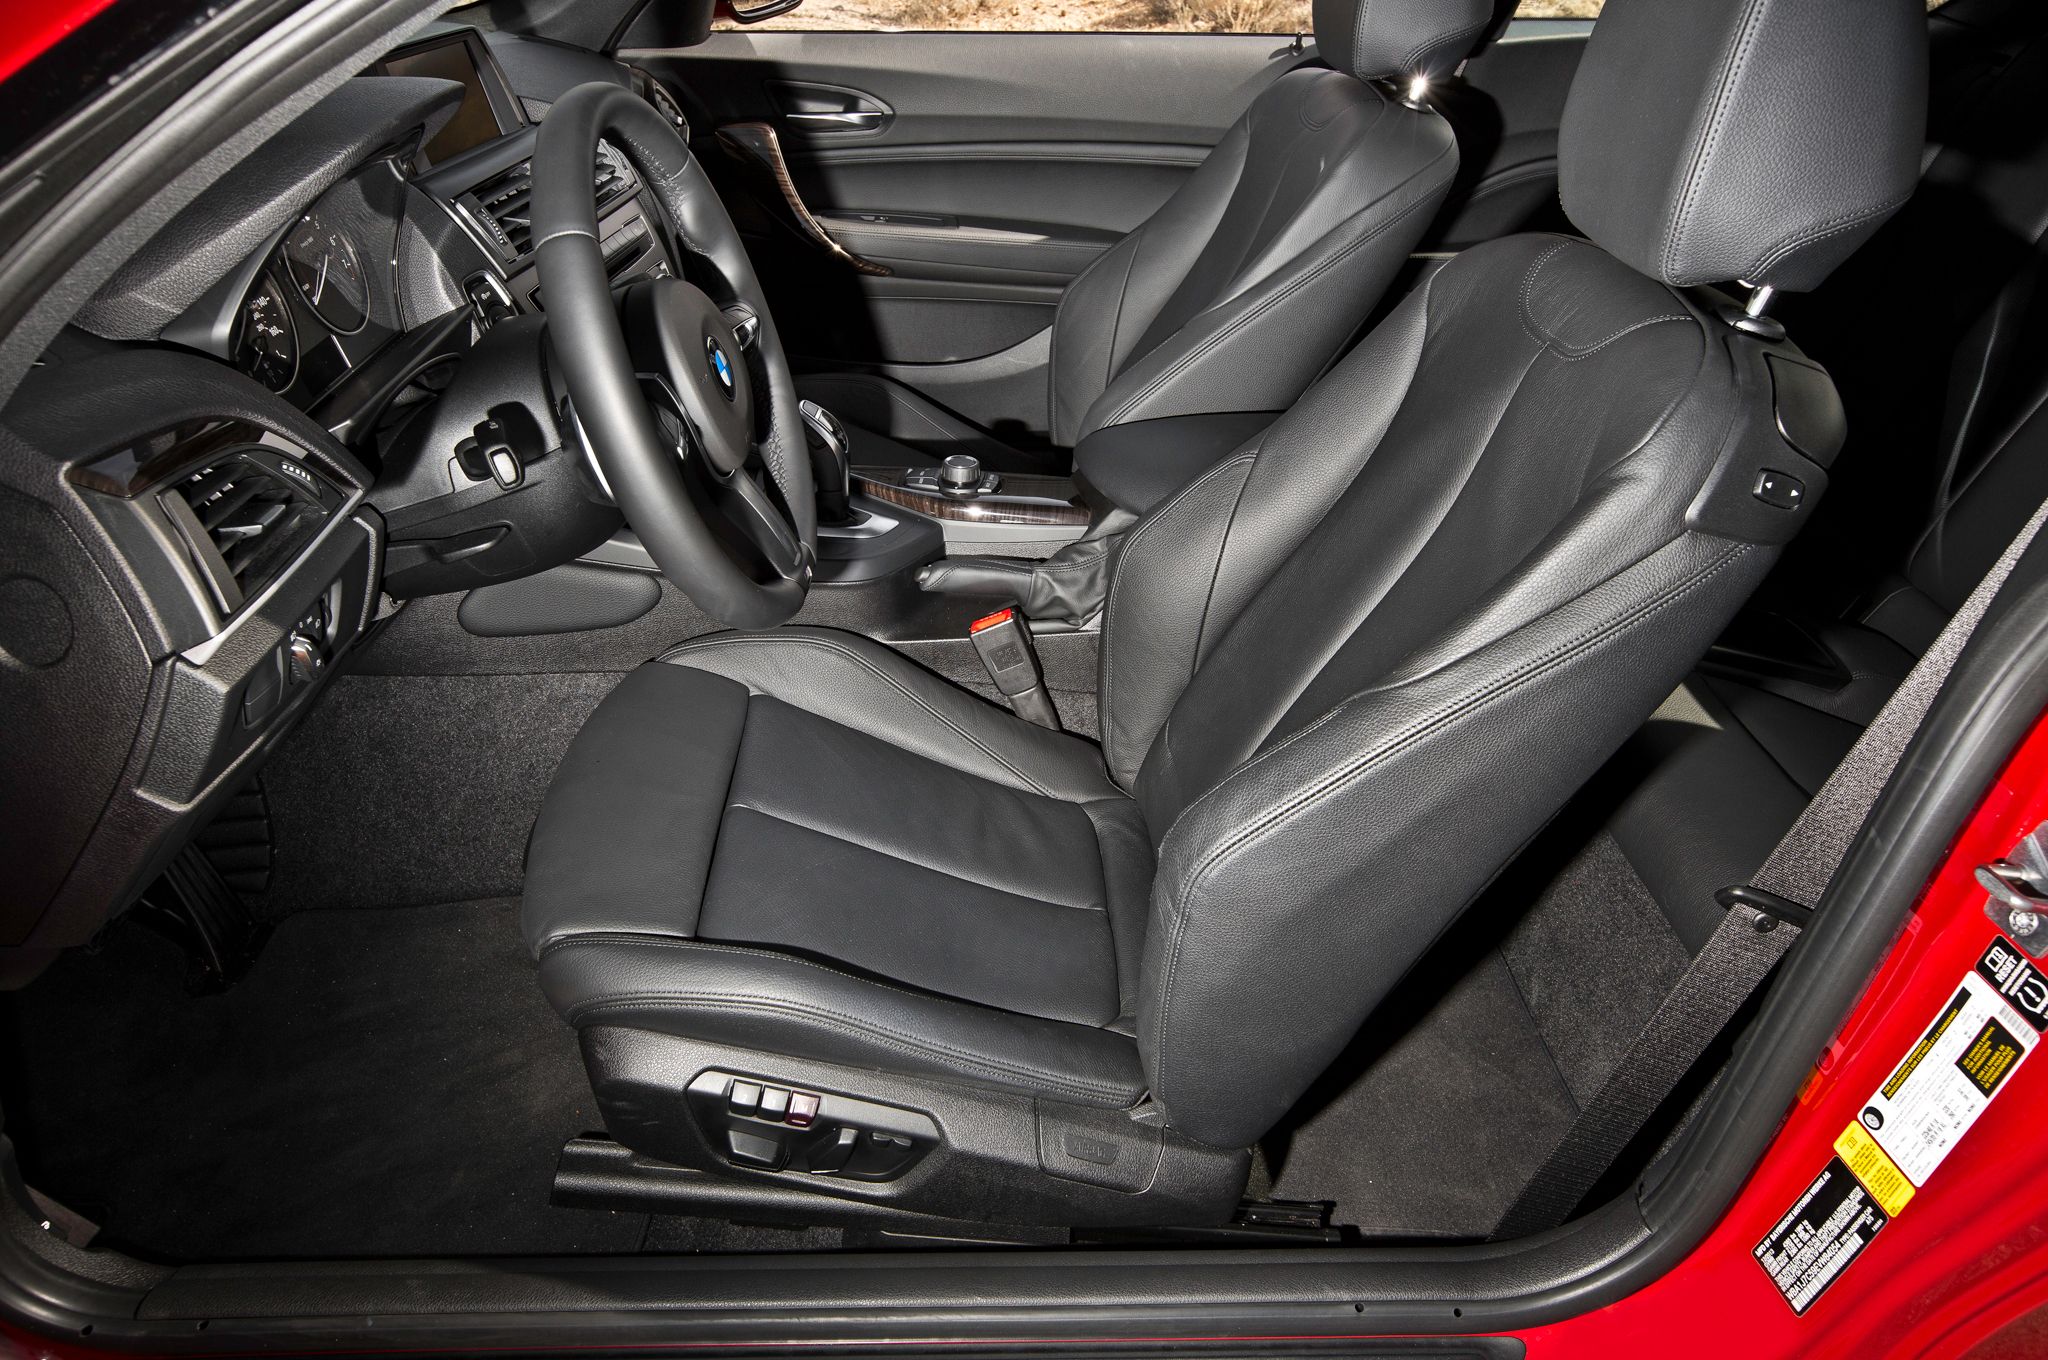 2014 Bmw M235i Front Interior Seats (View 8 of 8)